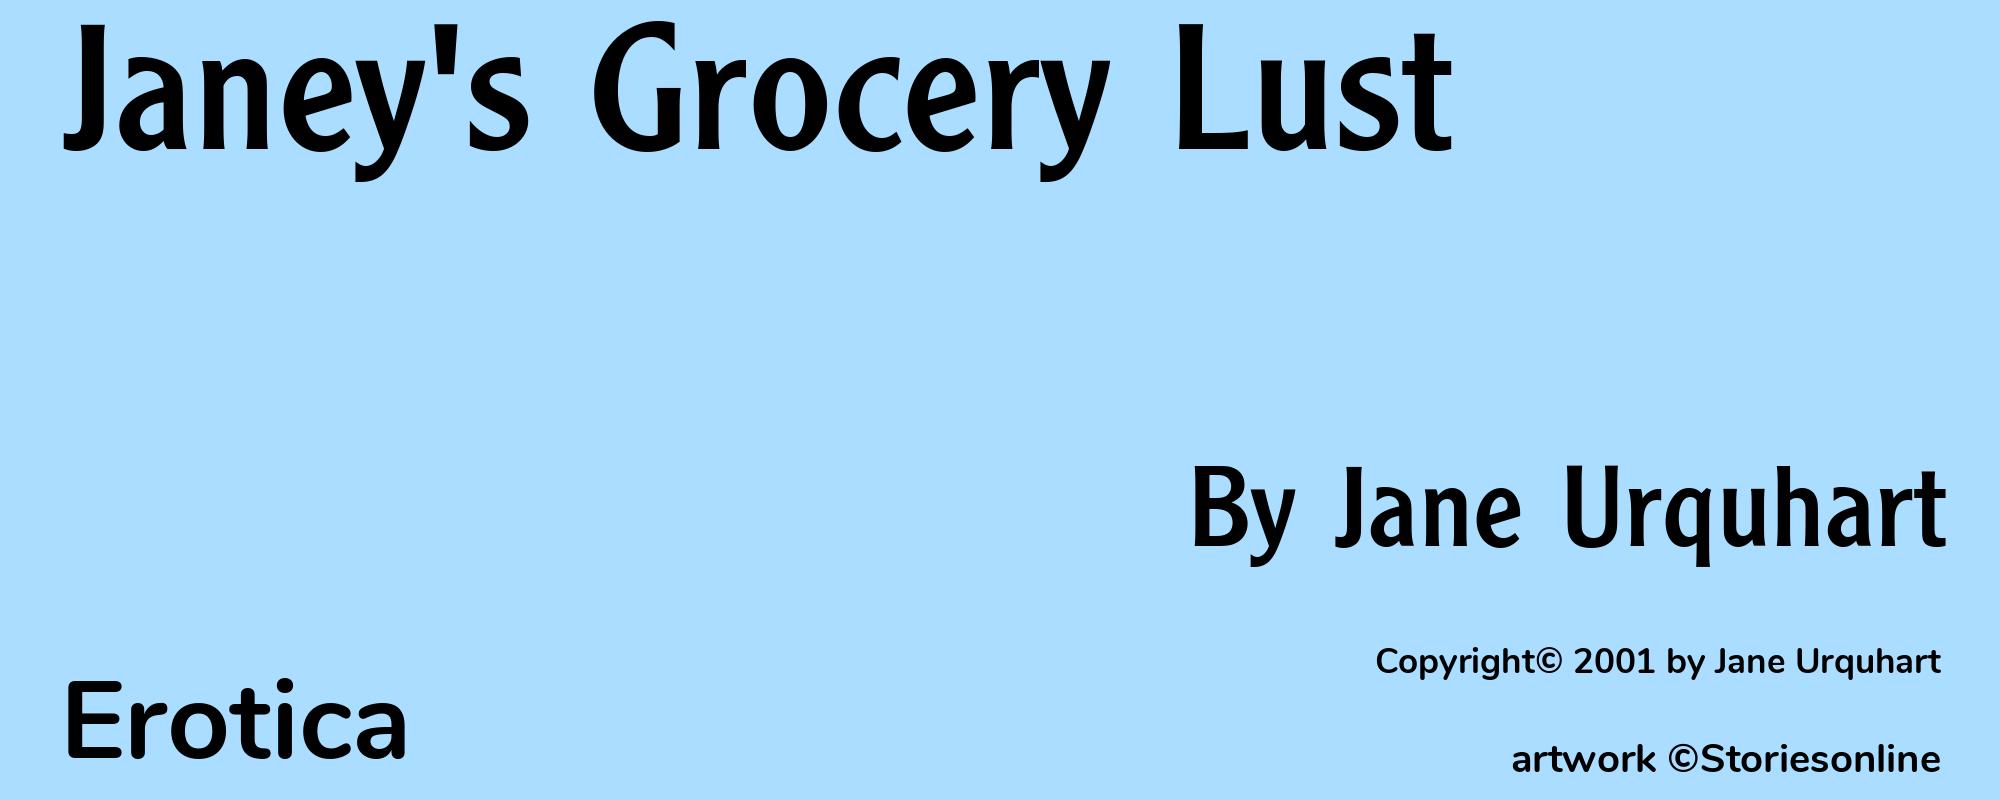 Janey's Grocery Lust - Cover